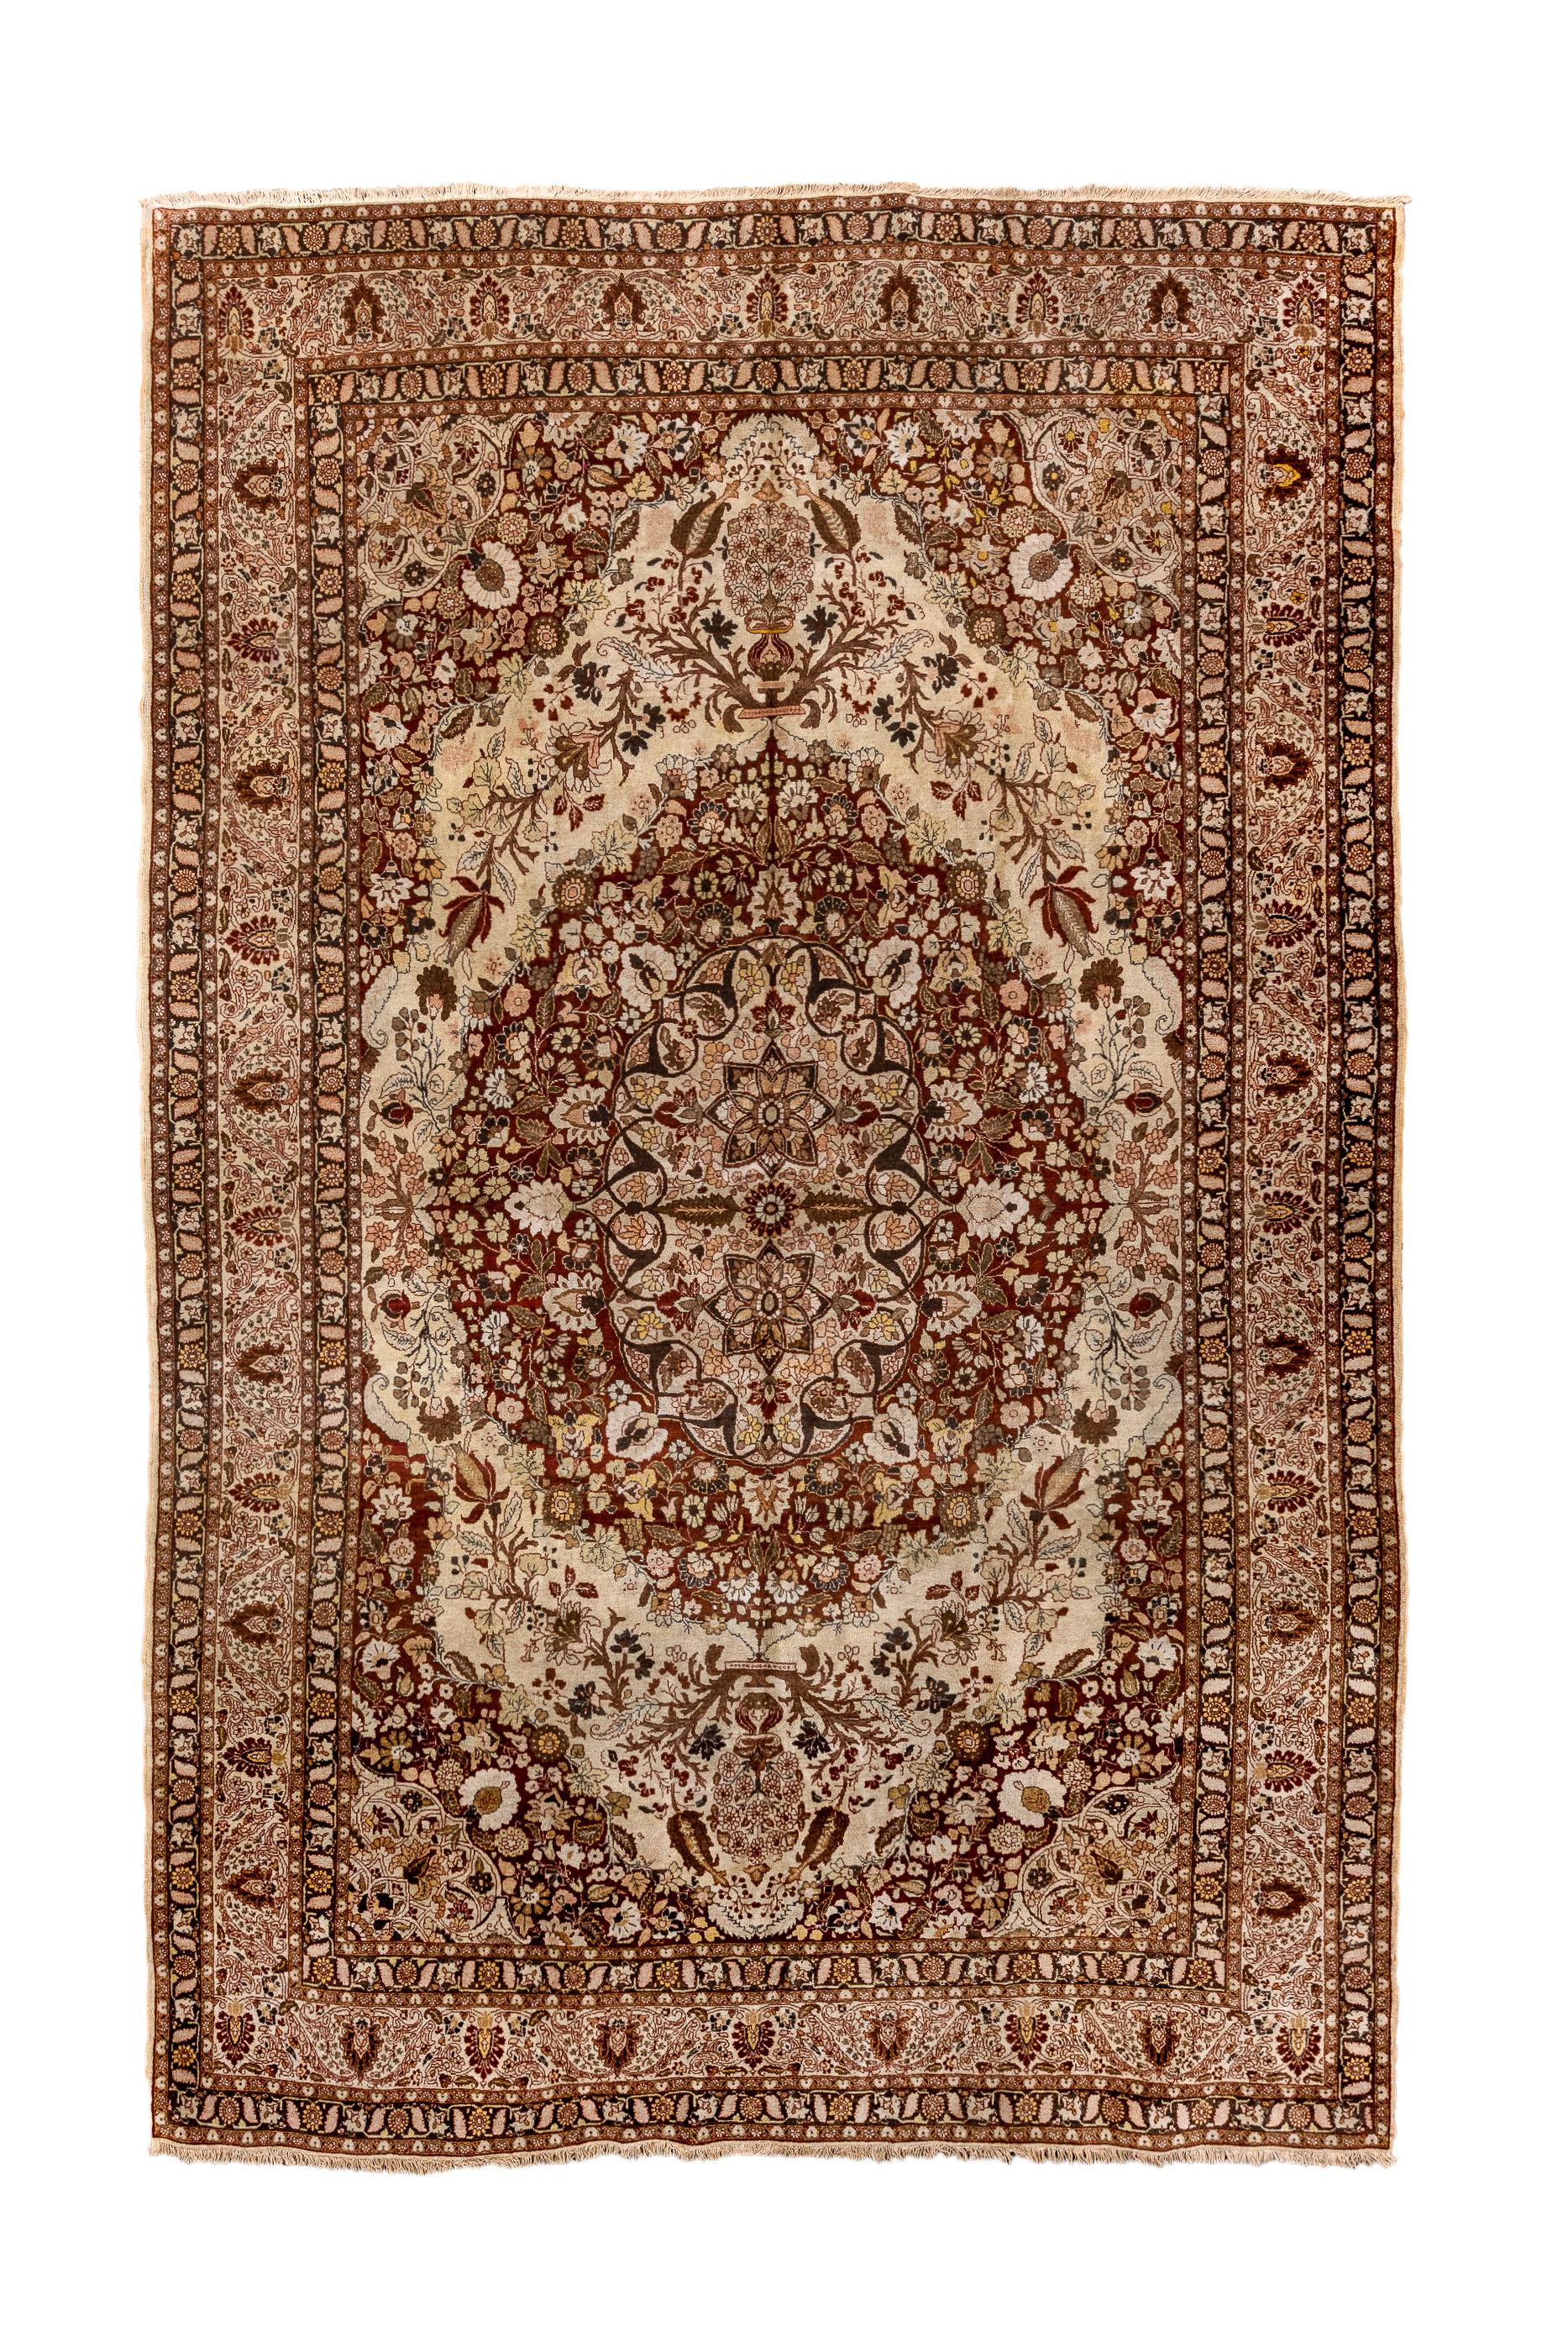 This Persian format NE Persian well woven city carpet shows a shaped cream field centred by a very expansive red medallion enclosing an elliptical sub-medallion edged with 12 radiating palmette pendants. Medallion pendants sit on trays. Red floral